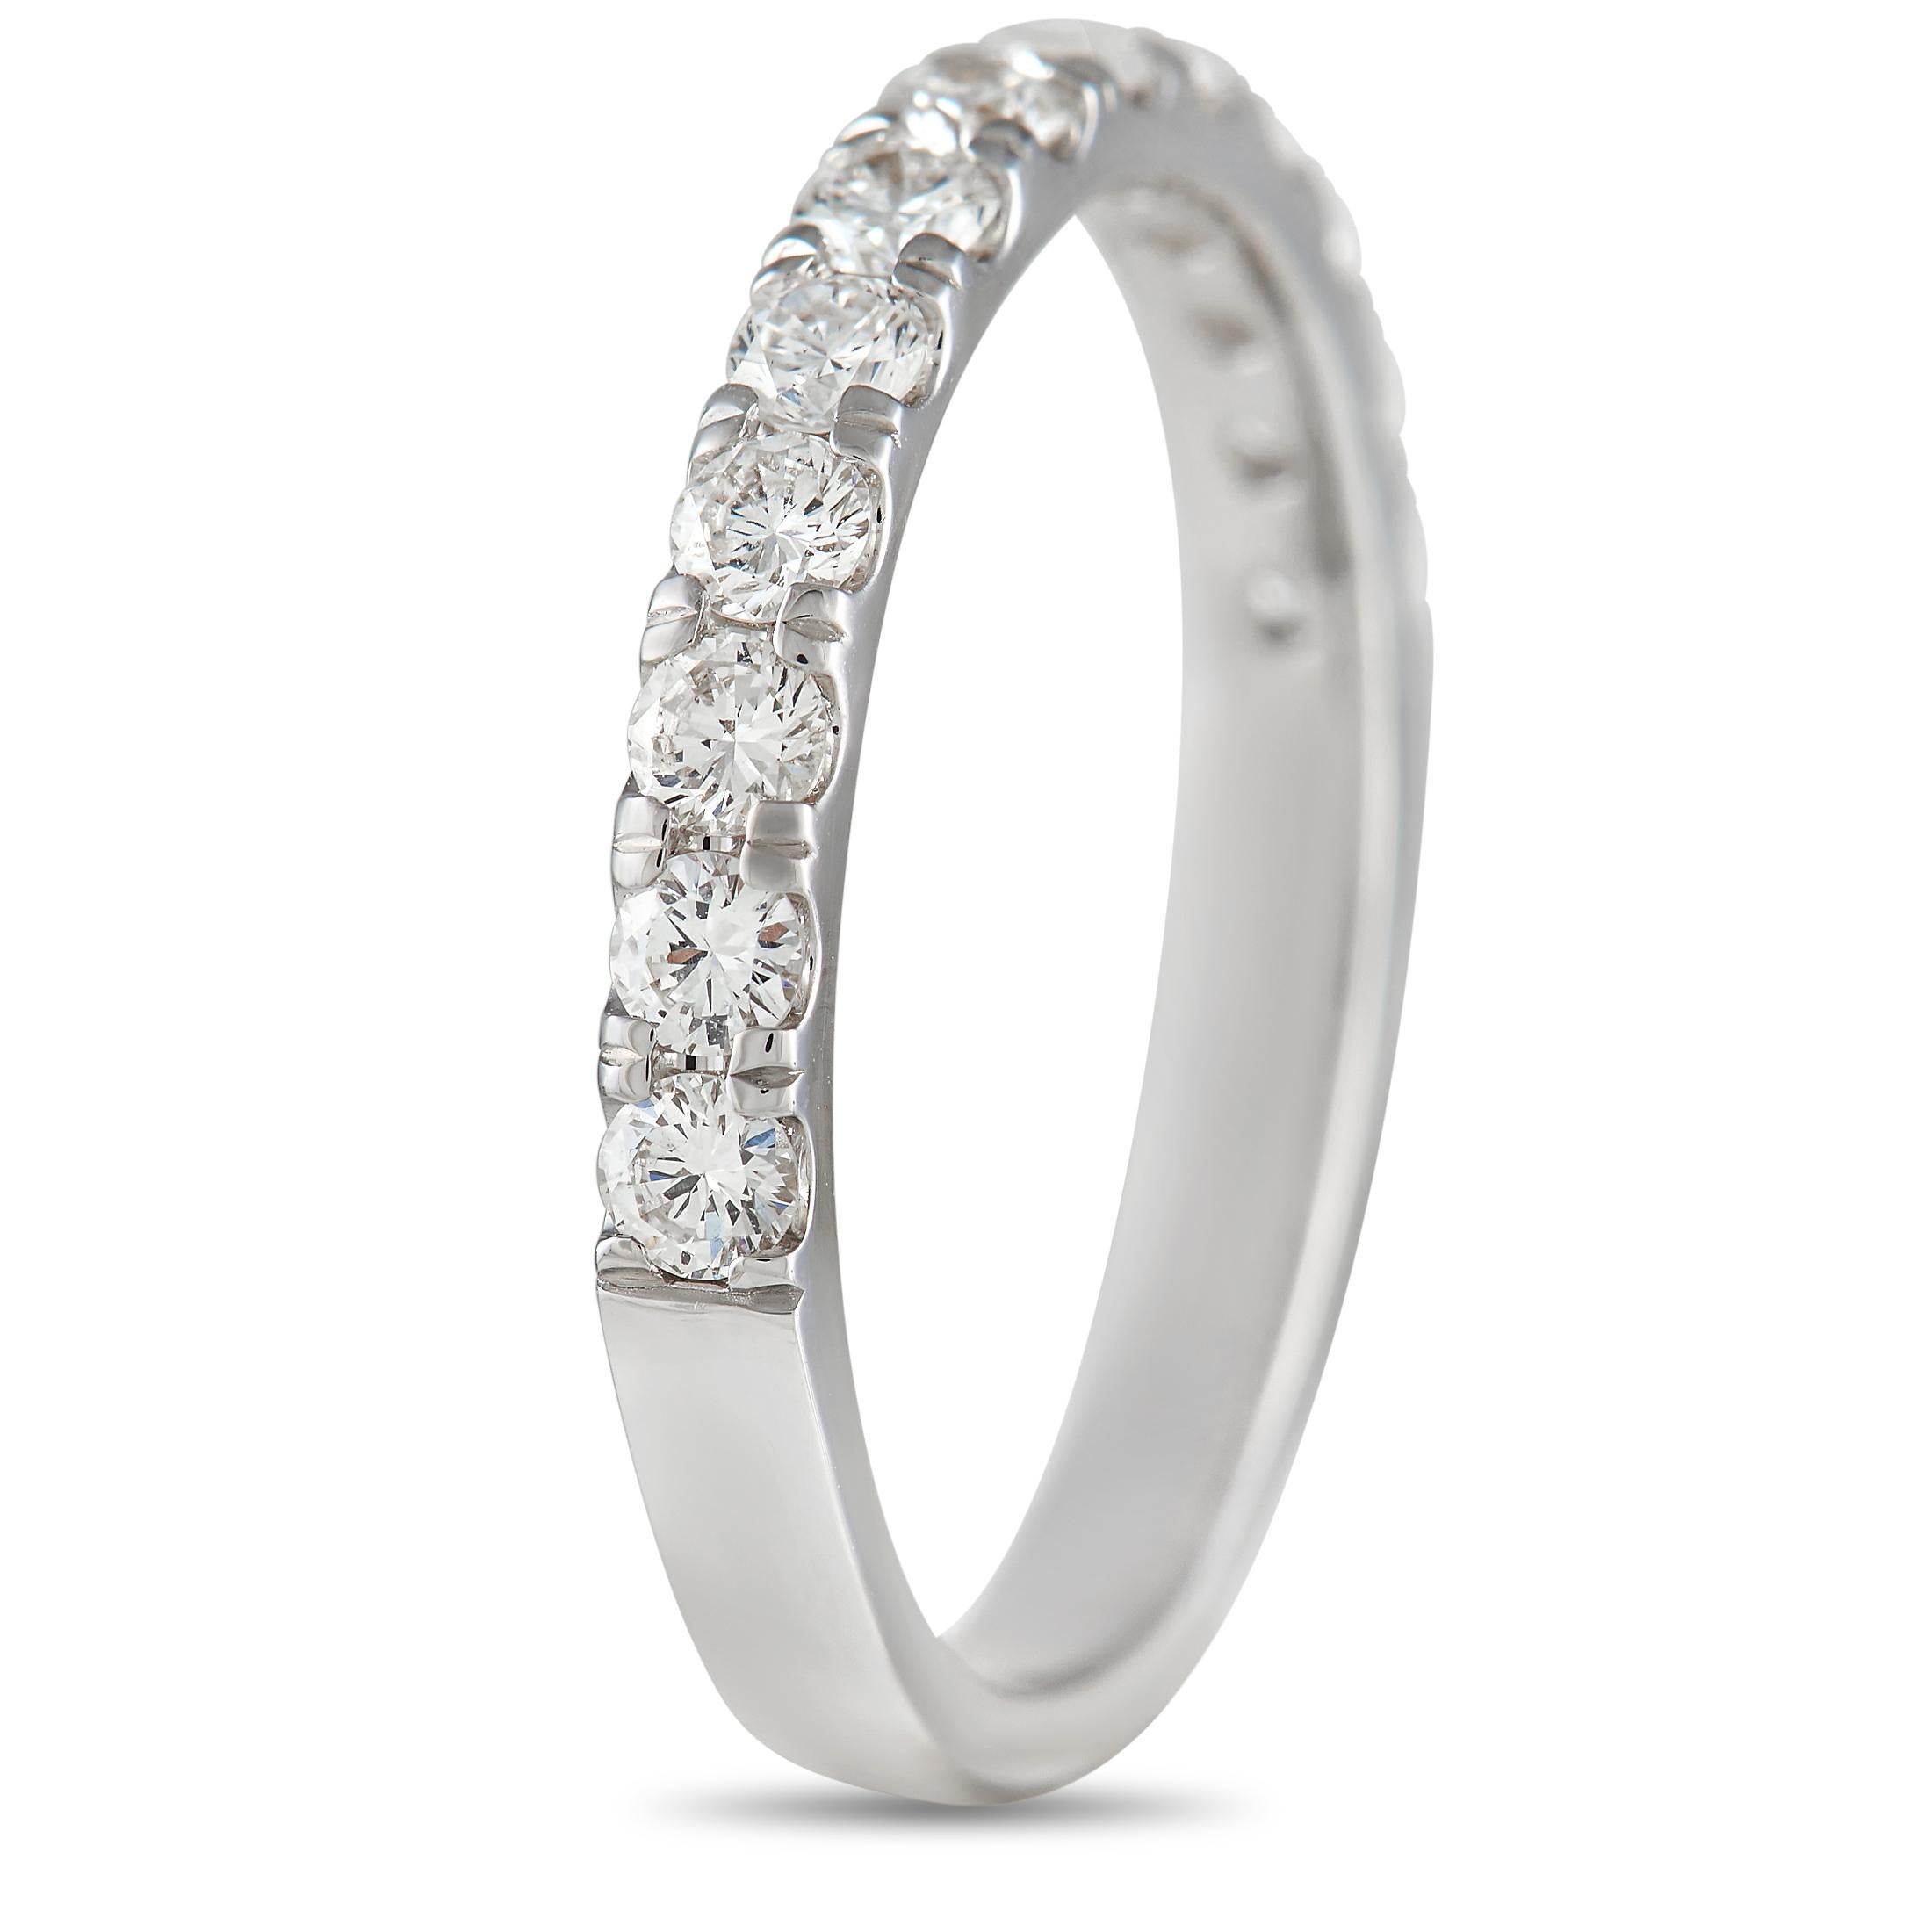 This luxurious 18K White Gold ring is sleek, stylish, and incredibly sophisticated. The top of the minimalist band – which measures 2mm wide – is covered in a series of sparkling diamonds totaling 0.59 carats. A slight 1mm top height makes it a